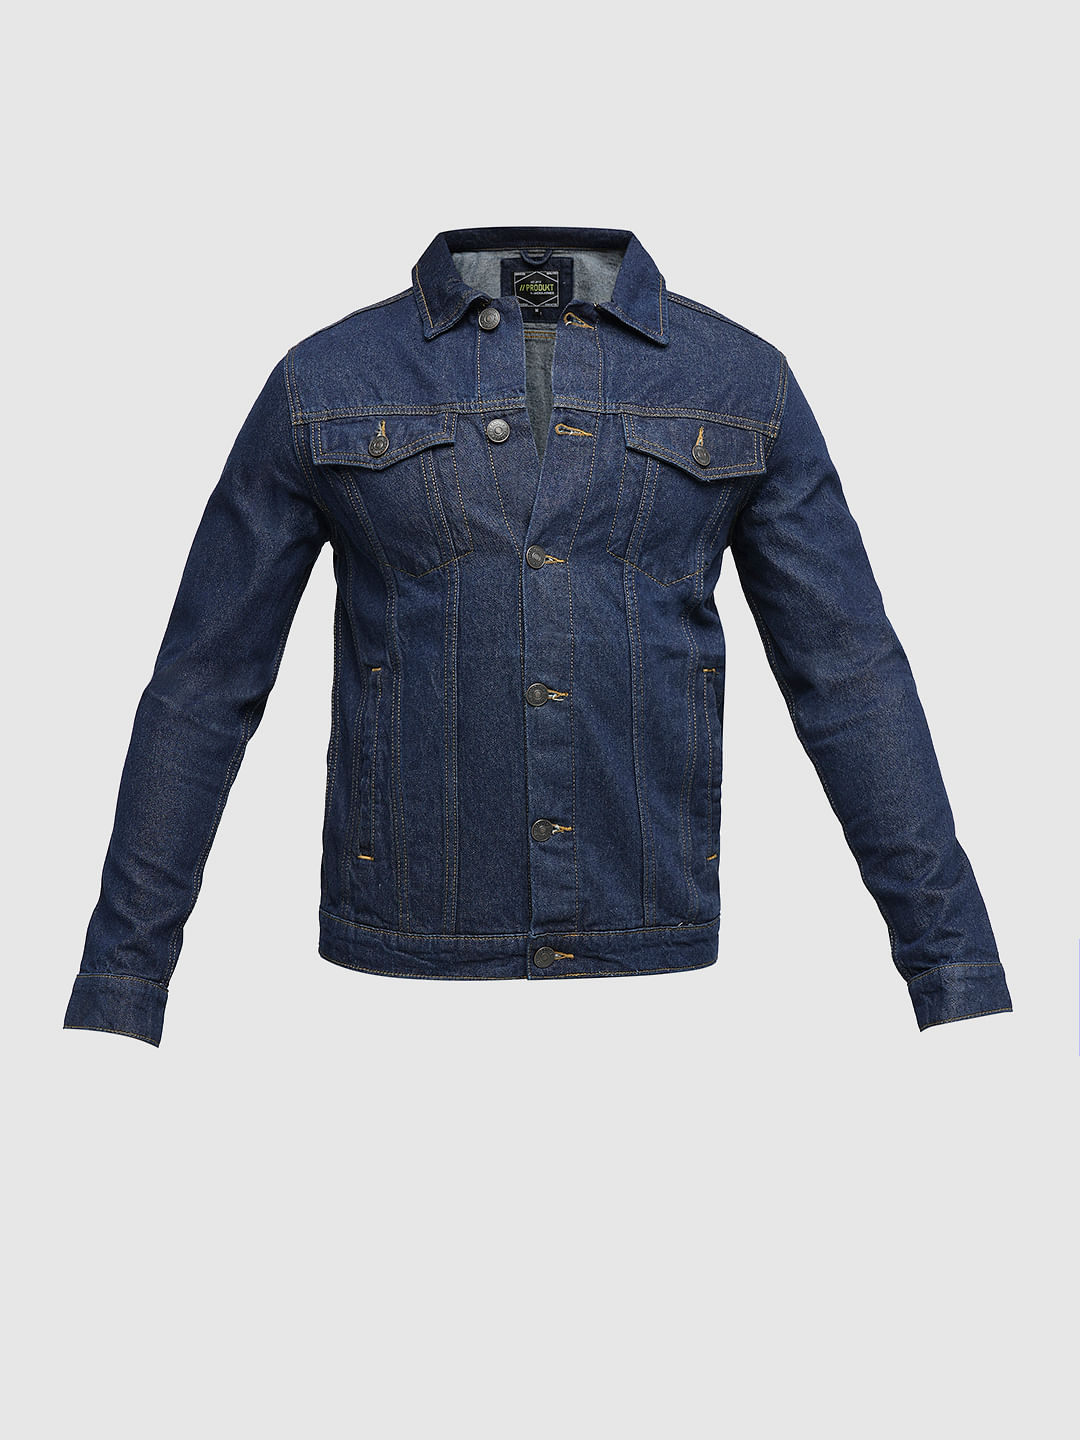 Blue Denim Jacket Outfits For Men (1200+ ideas & outfits) | Lookastic